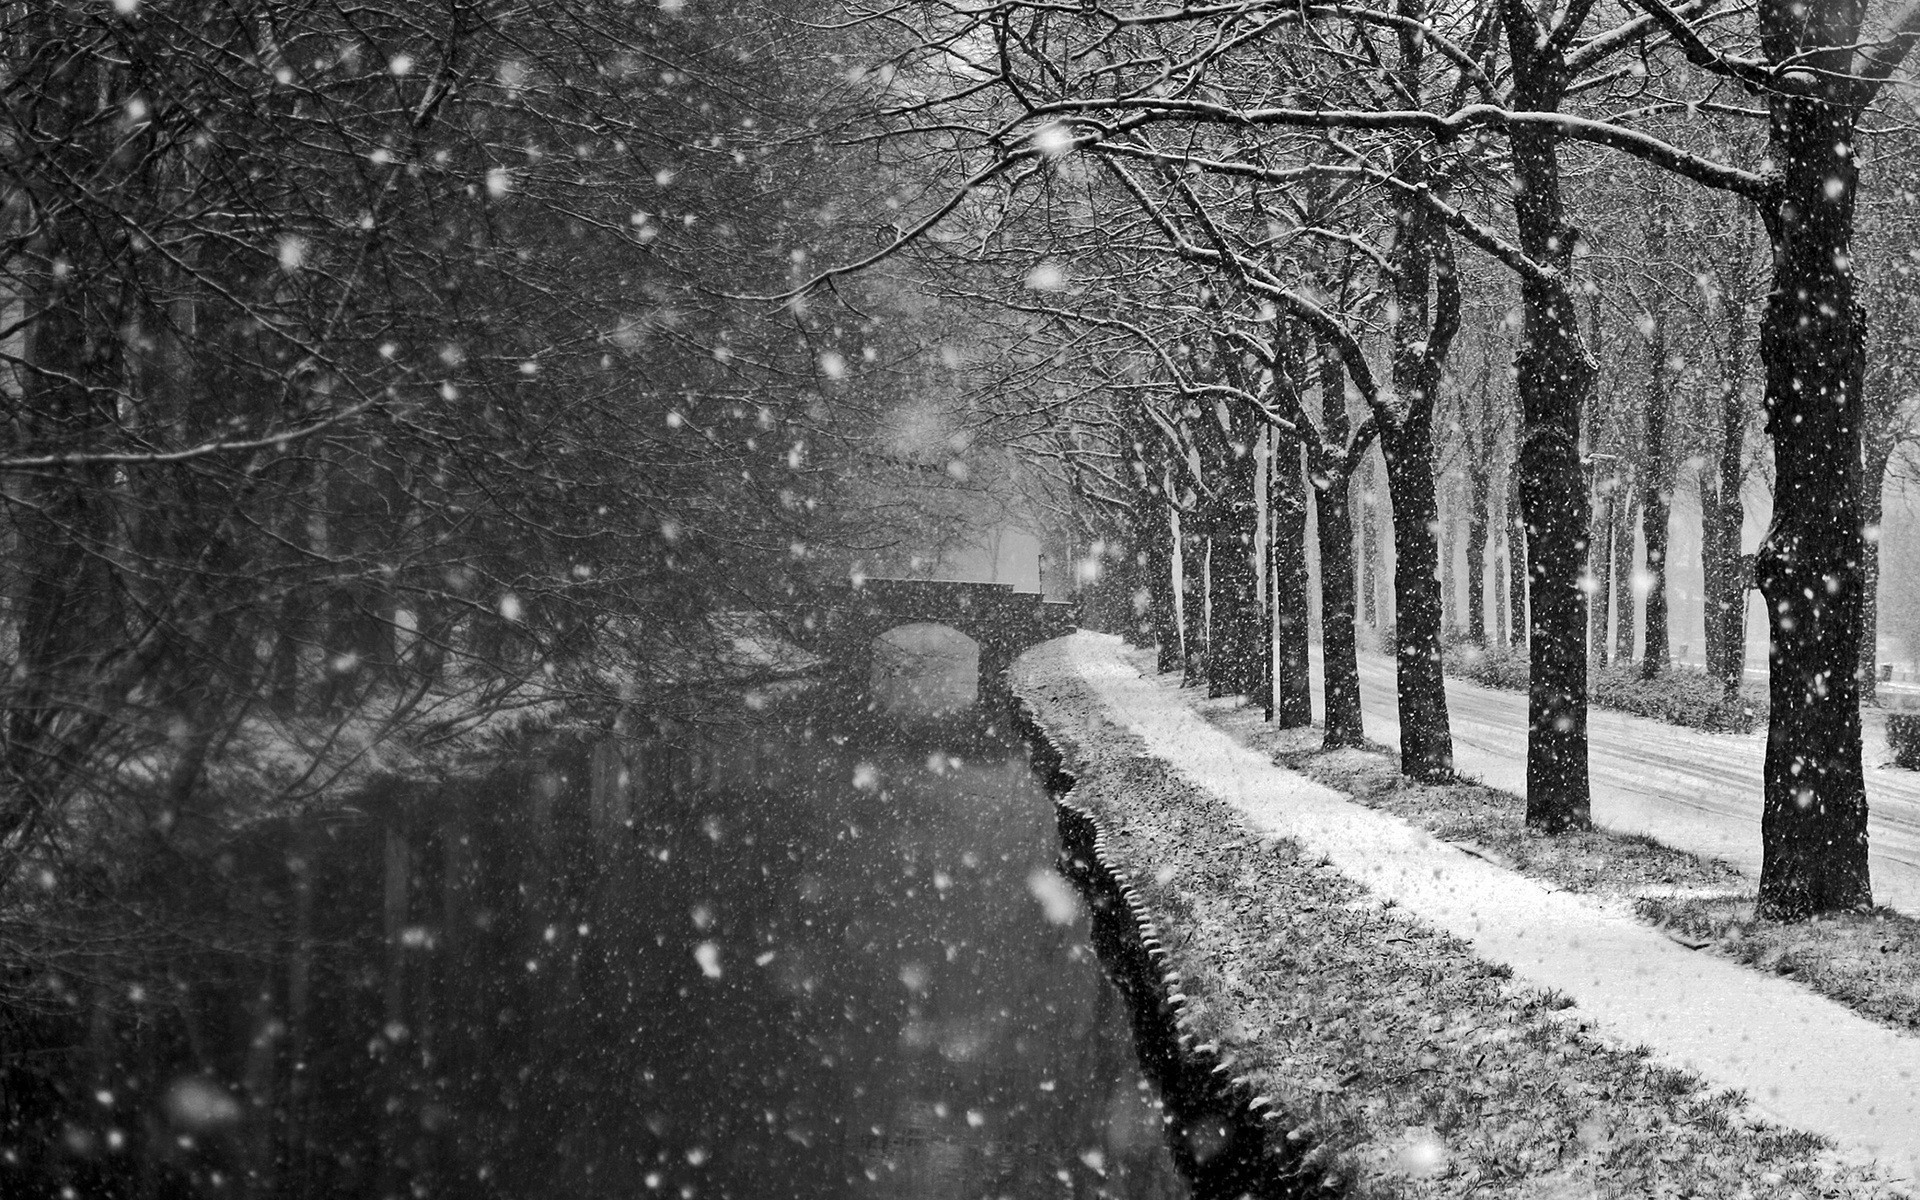 photography, Water, Monochrome, Landscape, Nature, River, Snow, Trees